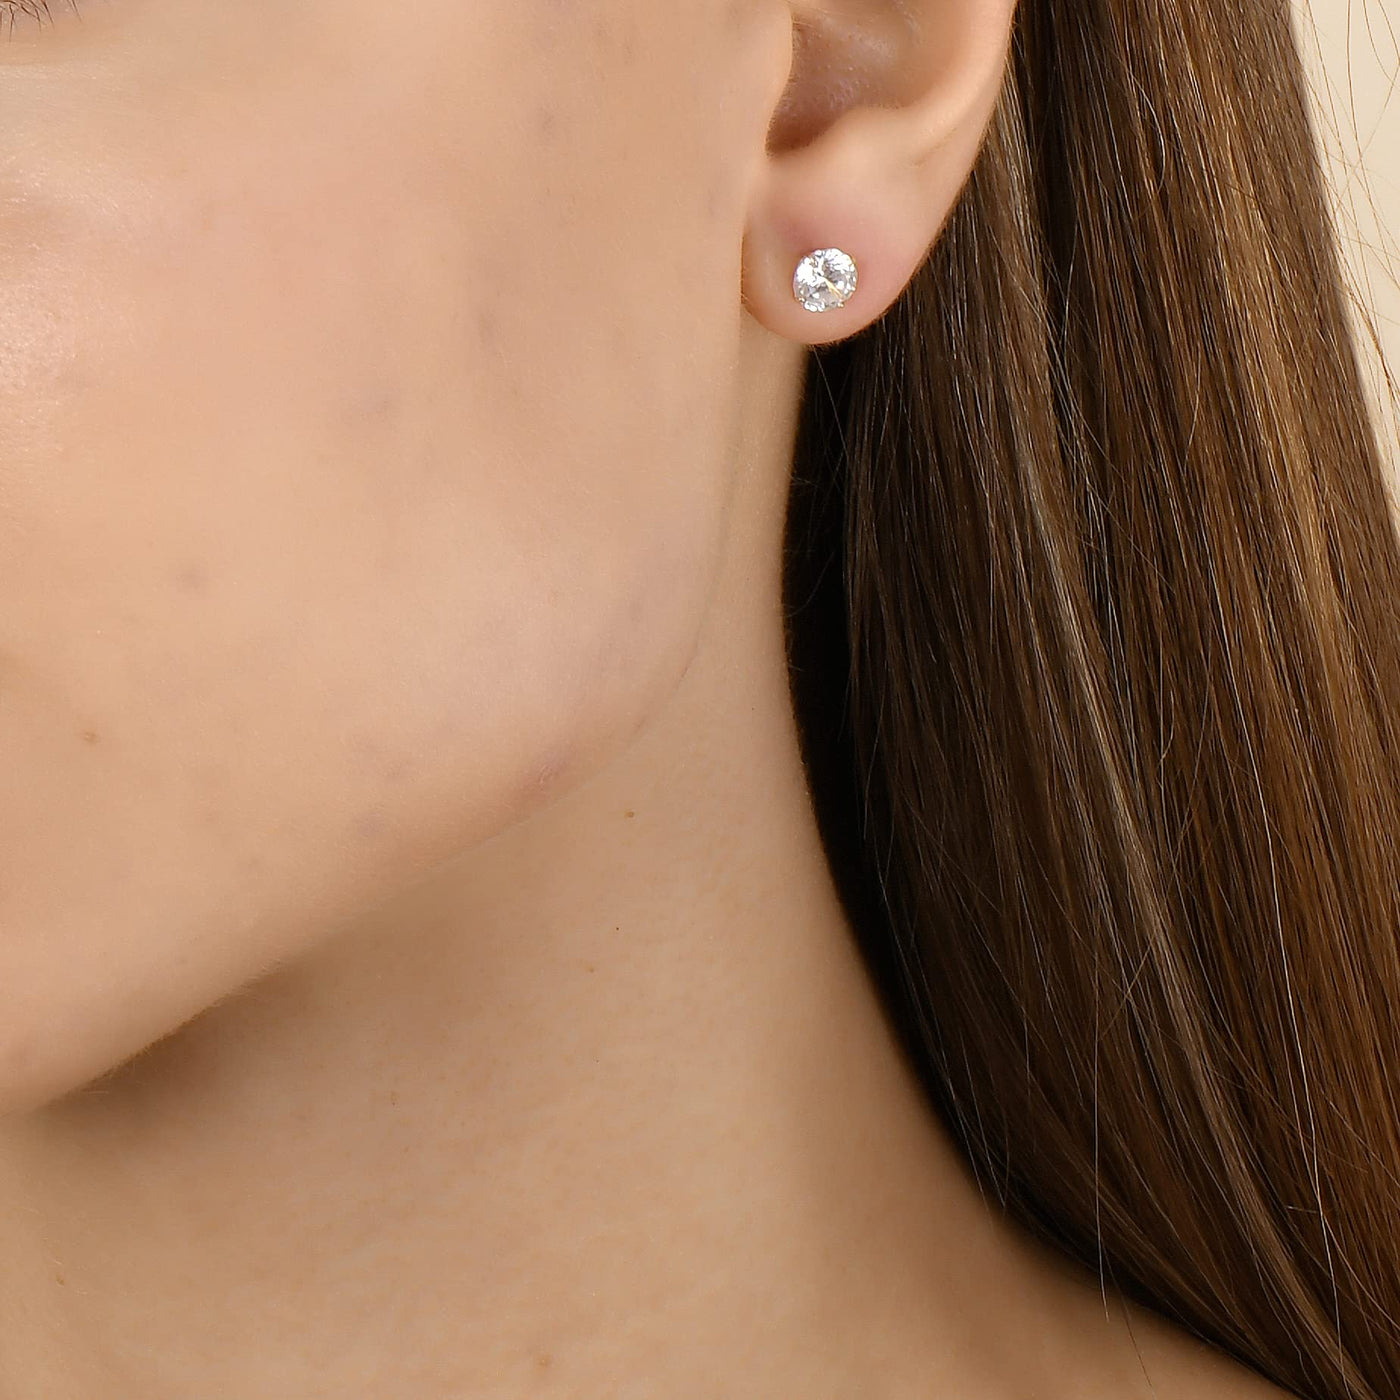 14K Gold Round CZ Stud Earrings - Available in White, Yellow, or Rose Gold